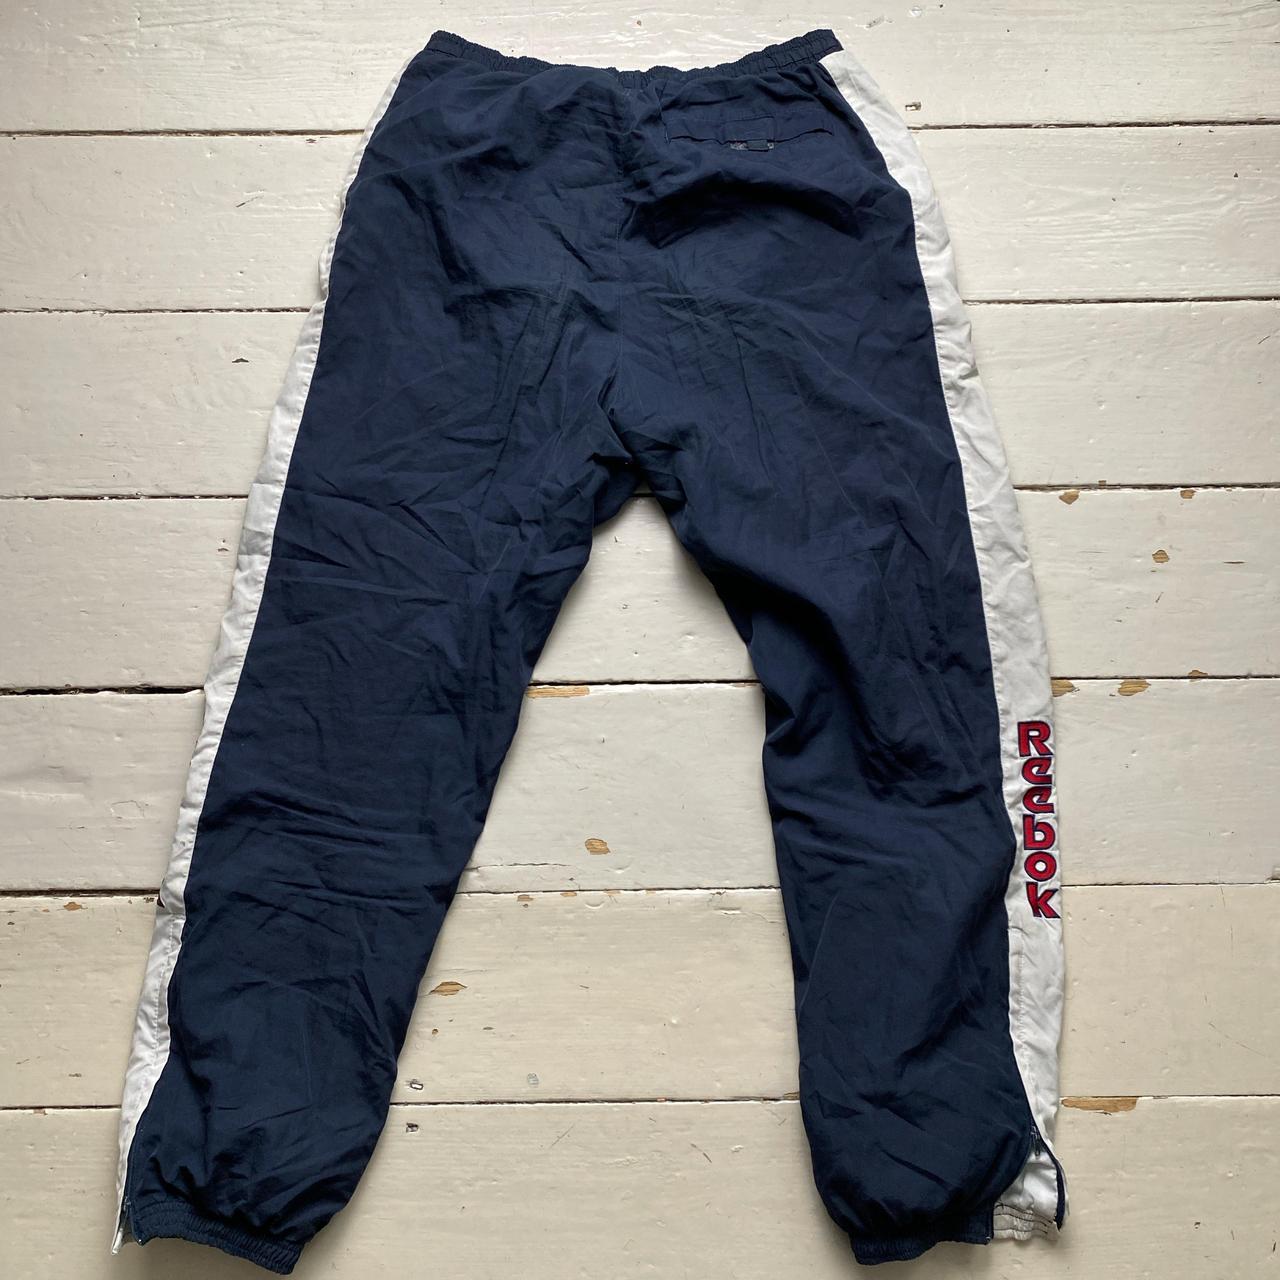 Reebok Vintage Shell Trackpant Baggy Navy White and Red Bottoms